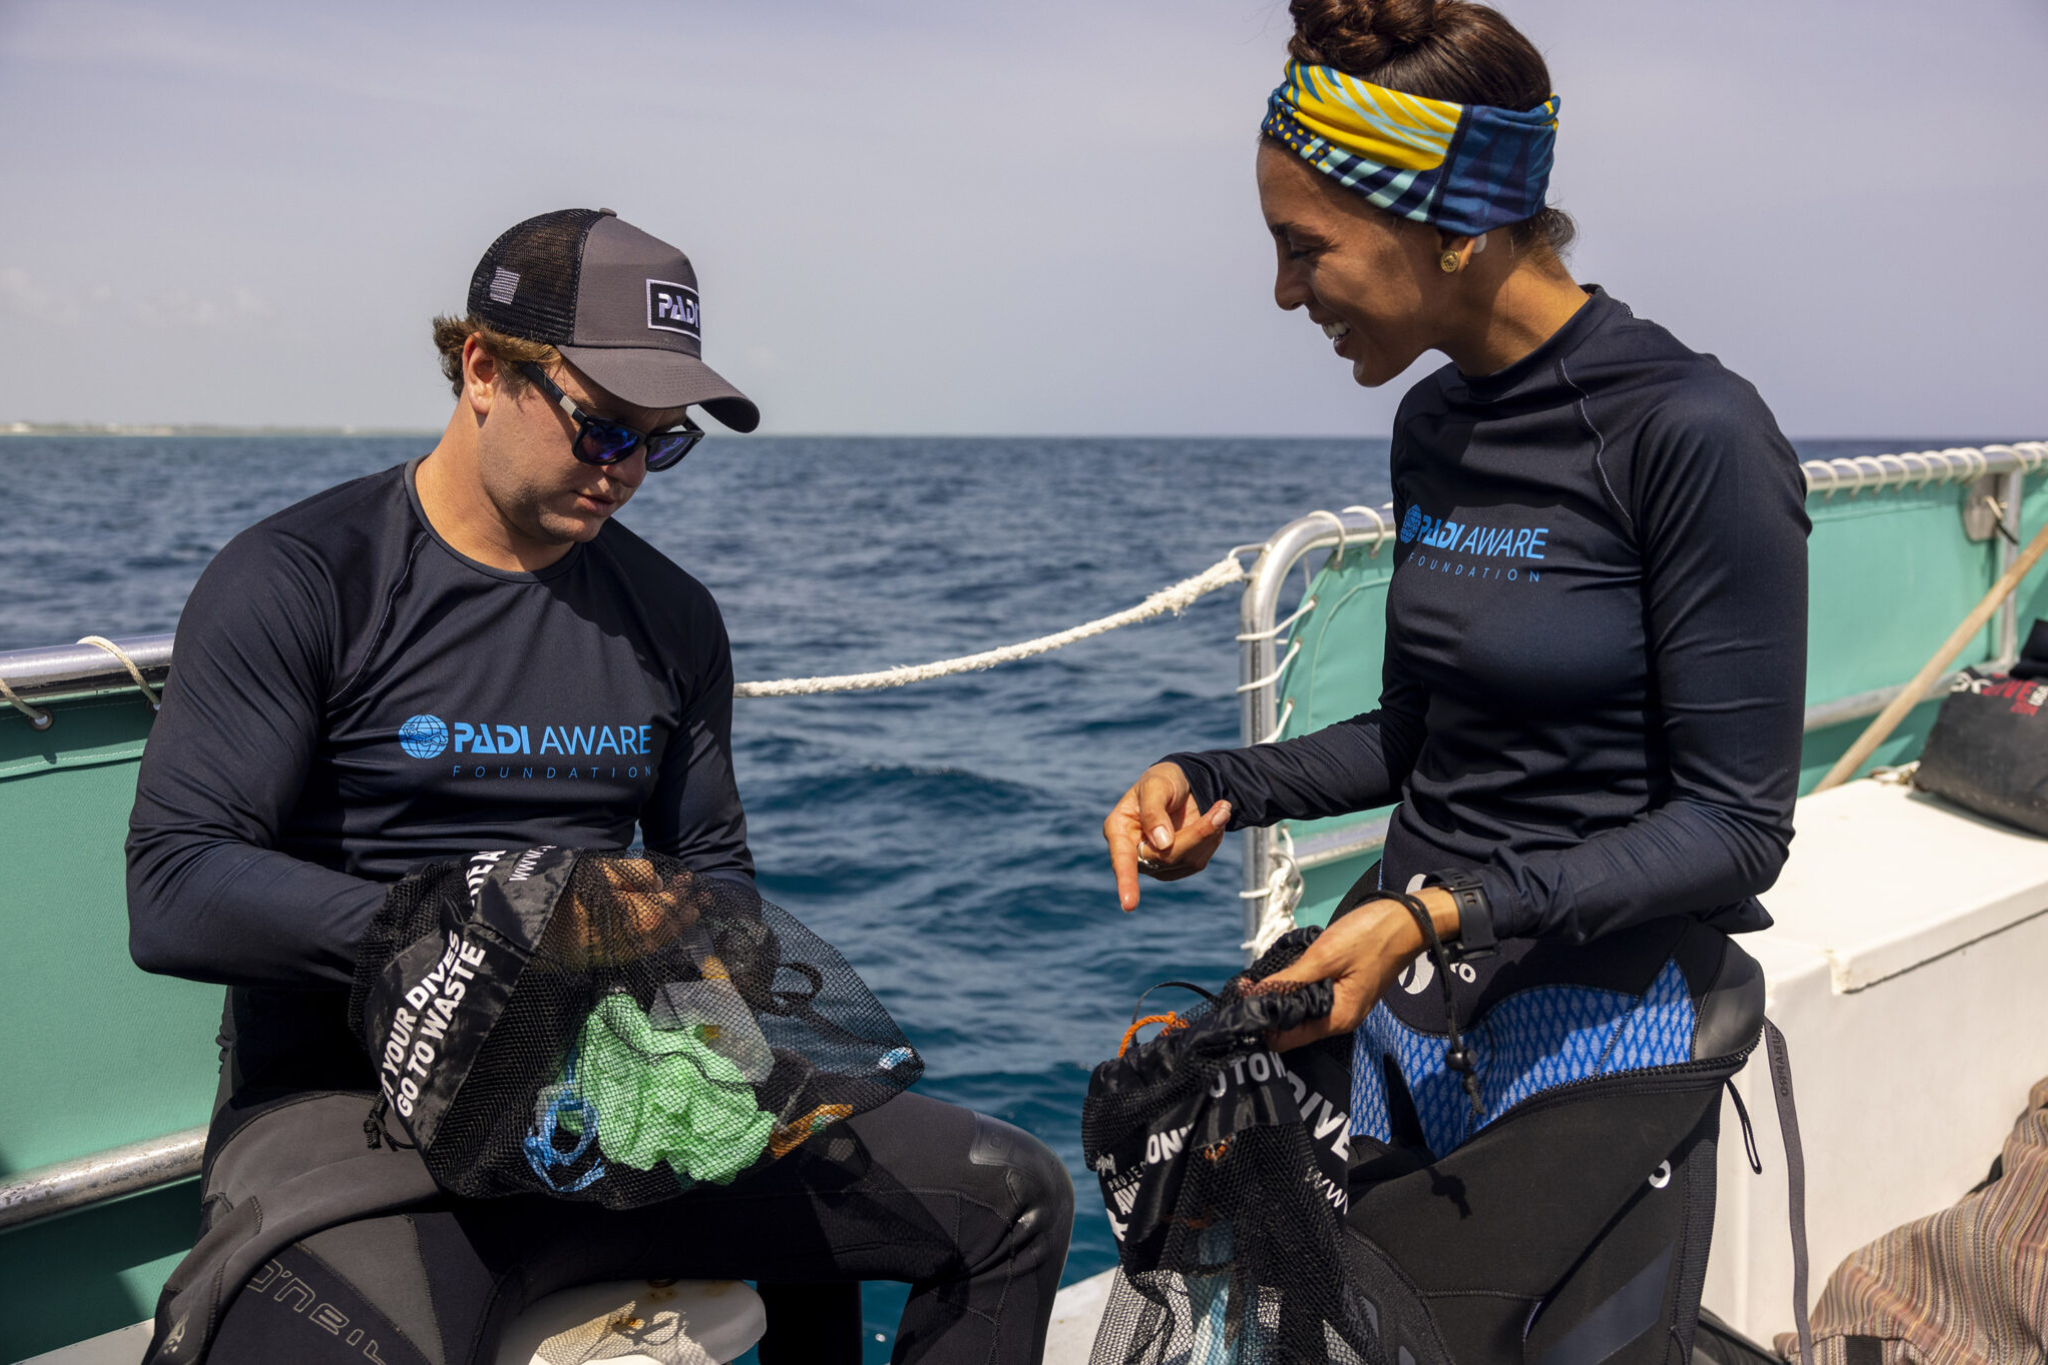 Divers completing their PADI AWARE Specialty, Dive Against Debris